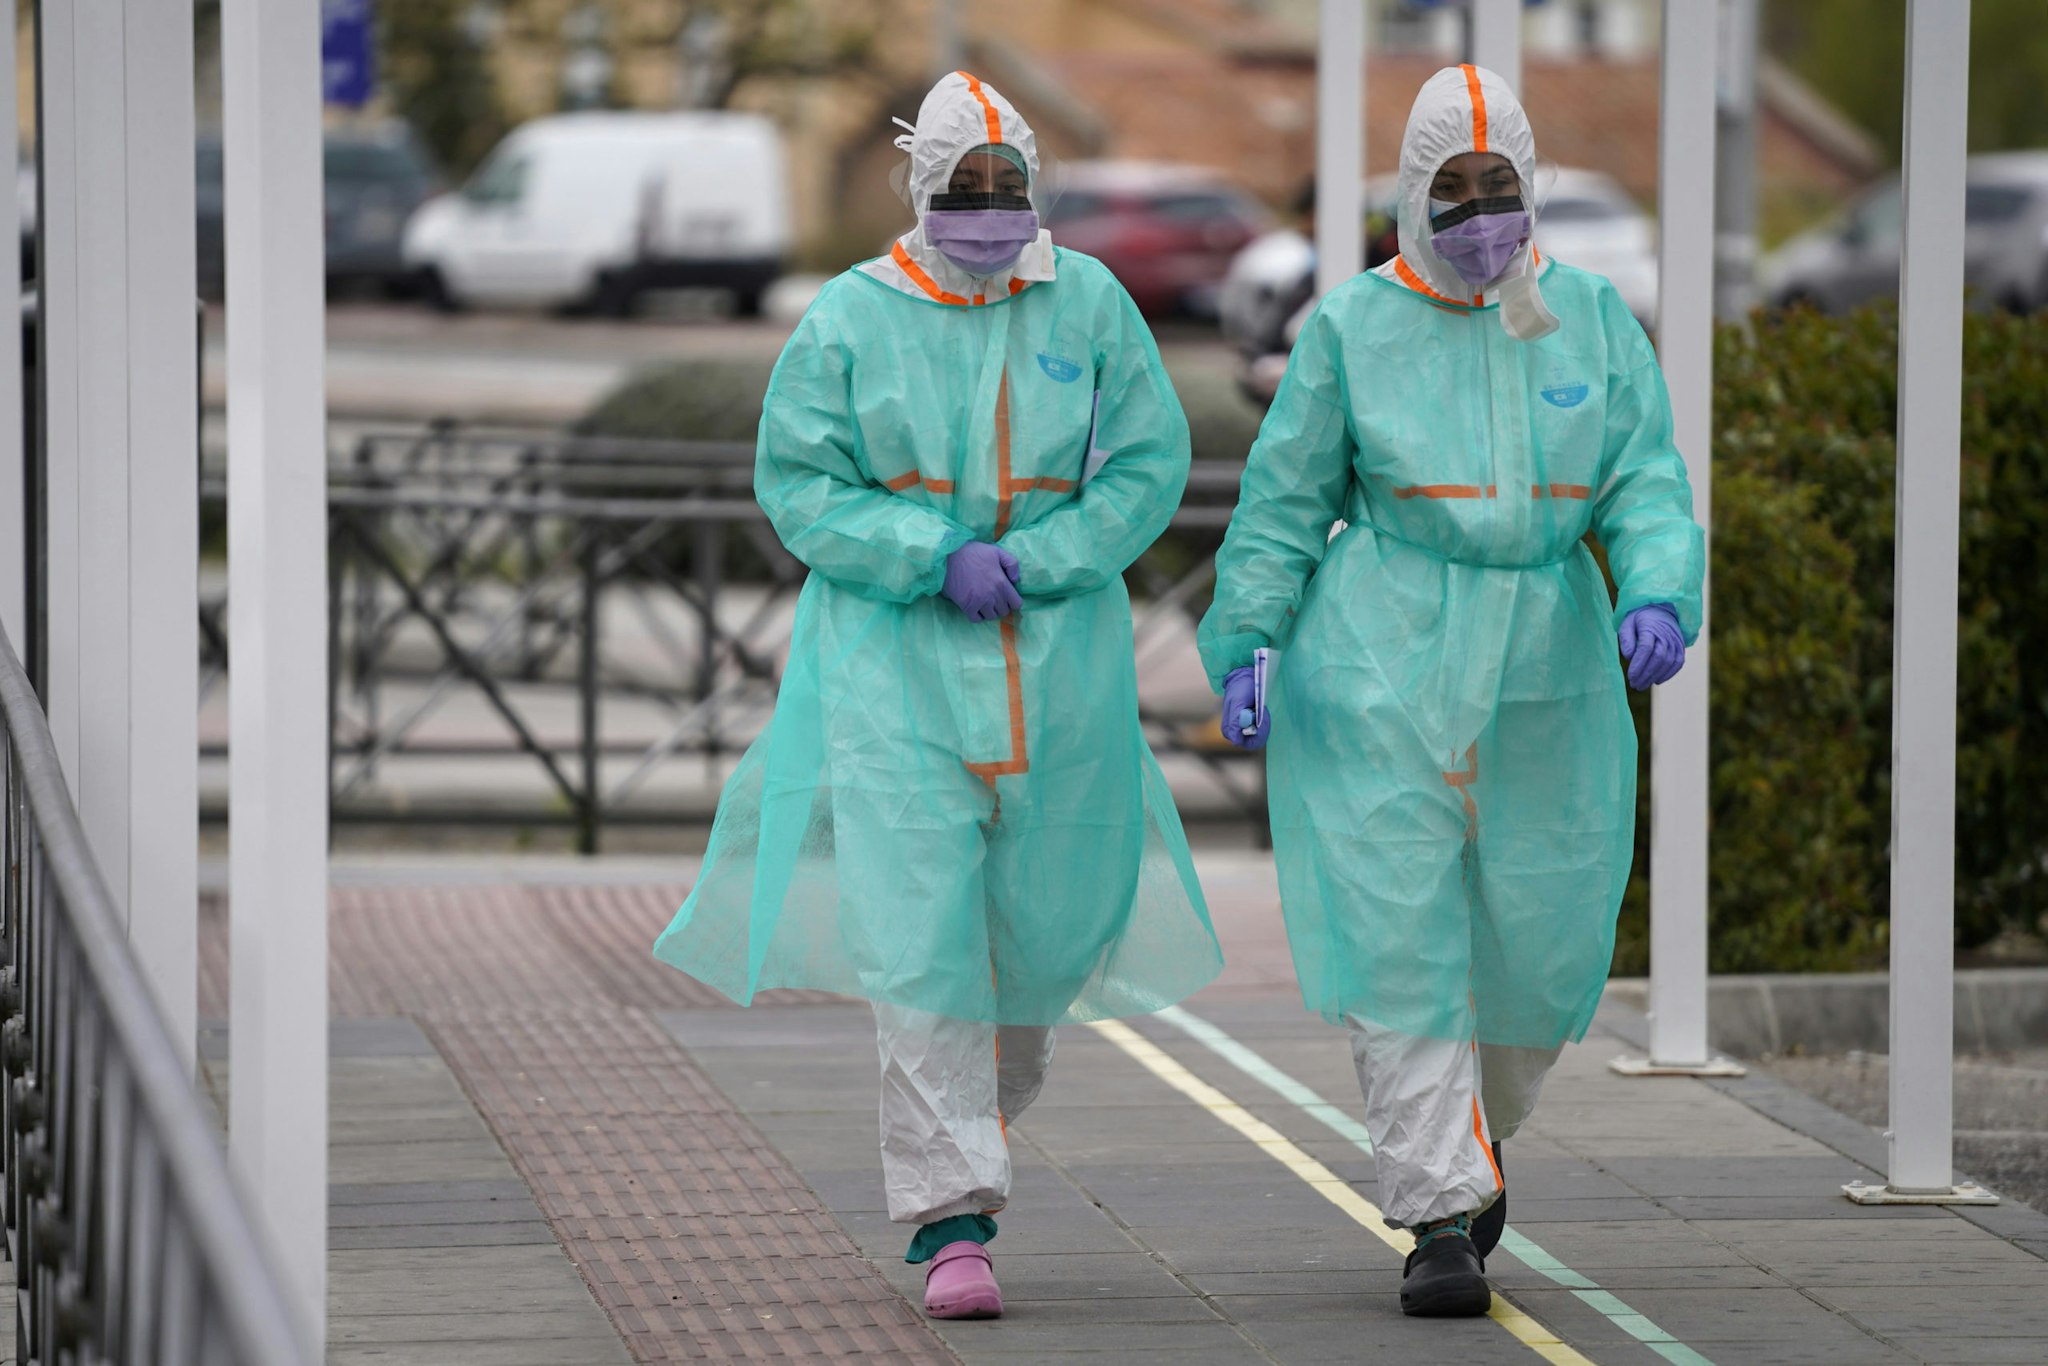 Medical workers wearing protective face masks and full body outfits walk outside the emergency department of the 12 de Octubre hospital in Madrid, Spain, on Monday, March 30, 2020. Spain suffered its deadliest day yet of the coronavirus outbreak this weekend as Prime Minister Pedro Sanchez convened an emergency cabinet meeting to try to chart a way out of the crisis rapidly engulfing the nation. Photographer: Paul Hanna/Bloomberg via Getty Images